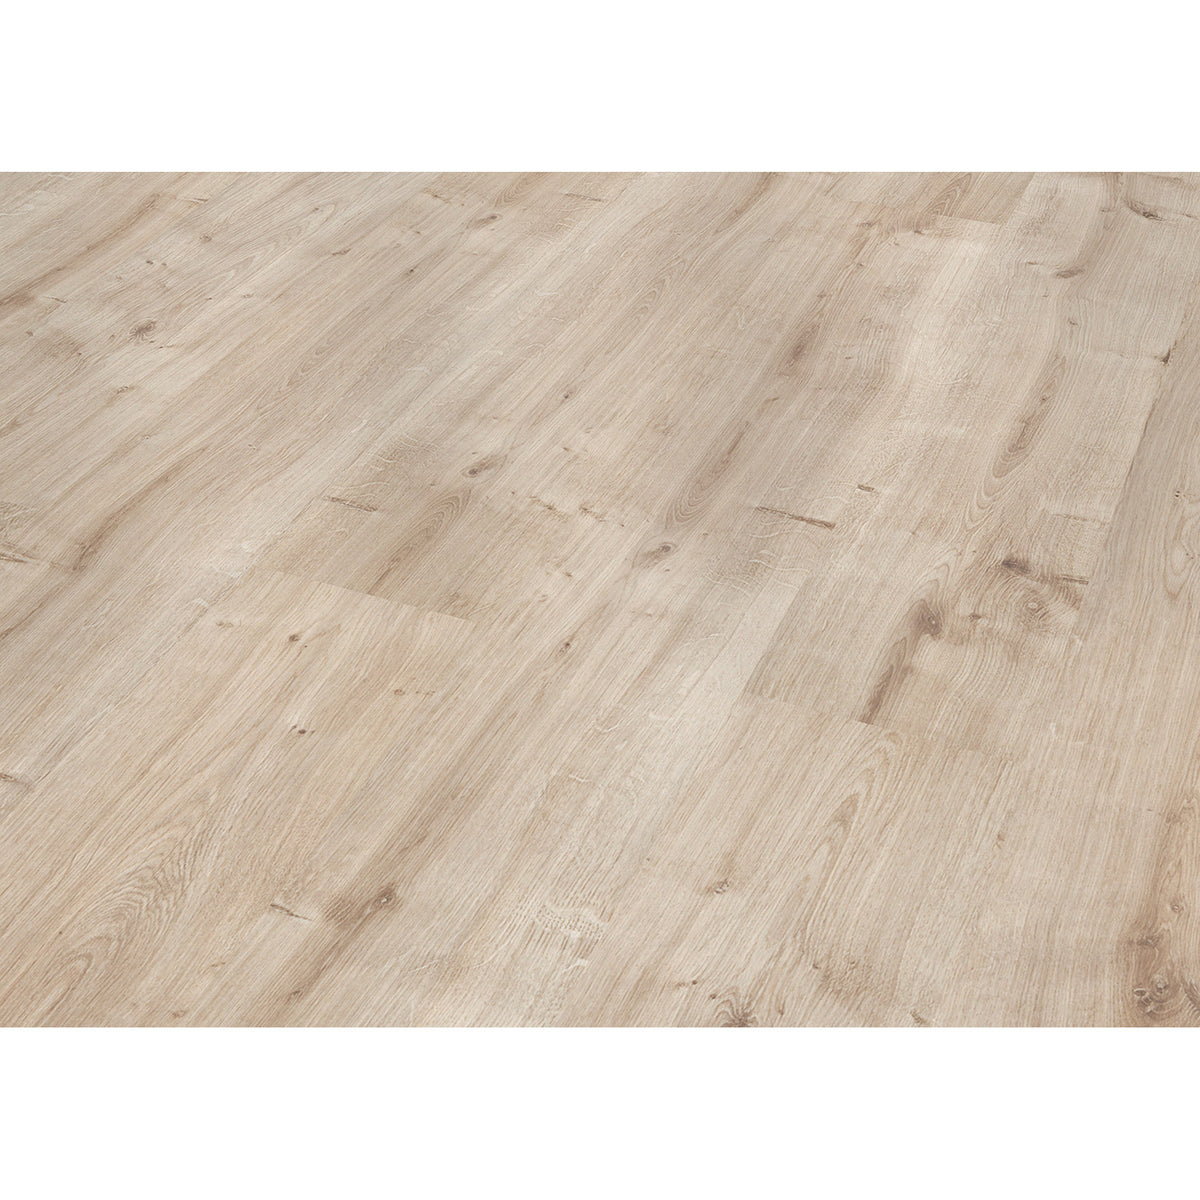 Inhaus - Solido Visions Collection - Natural Oak Close View